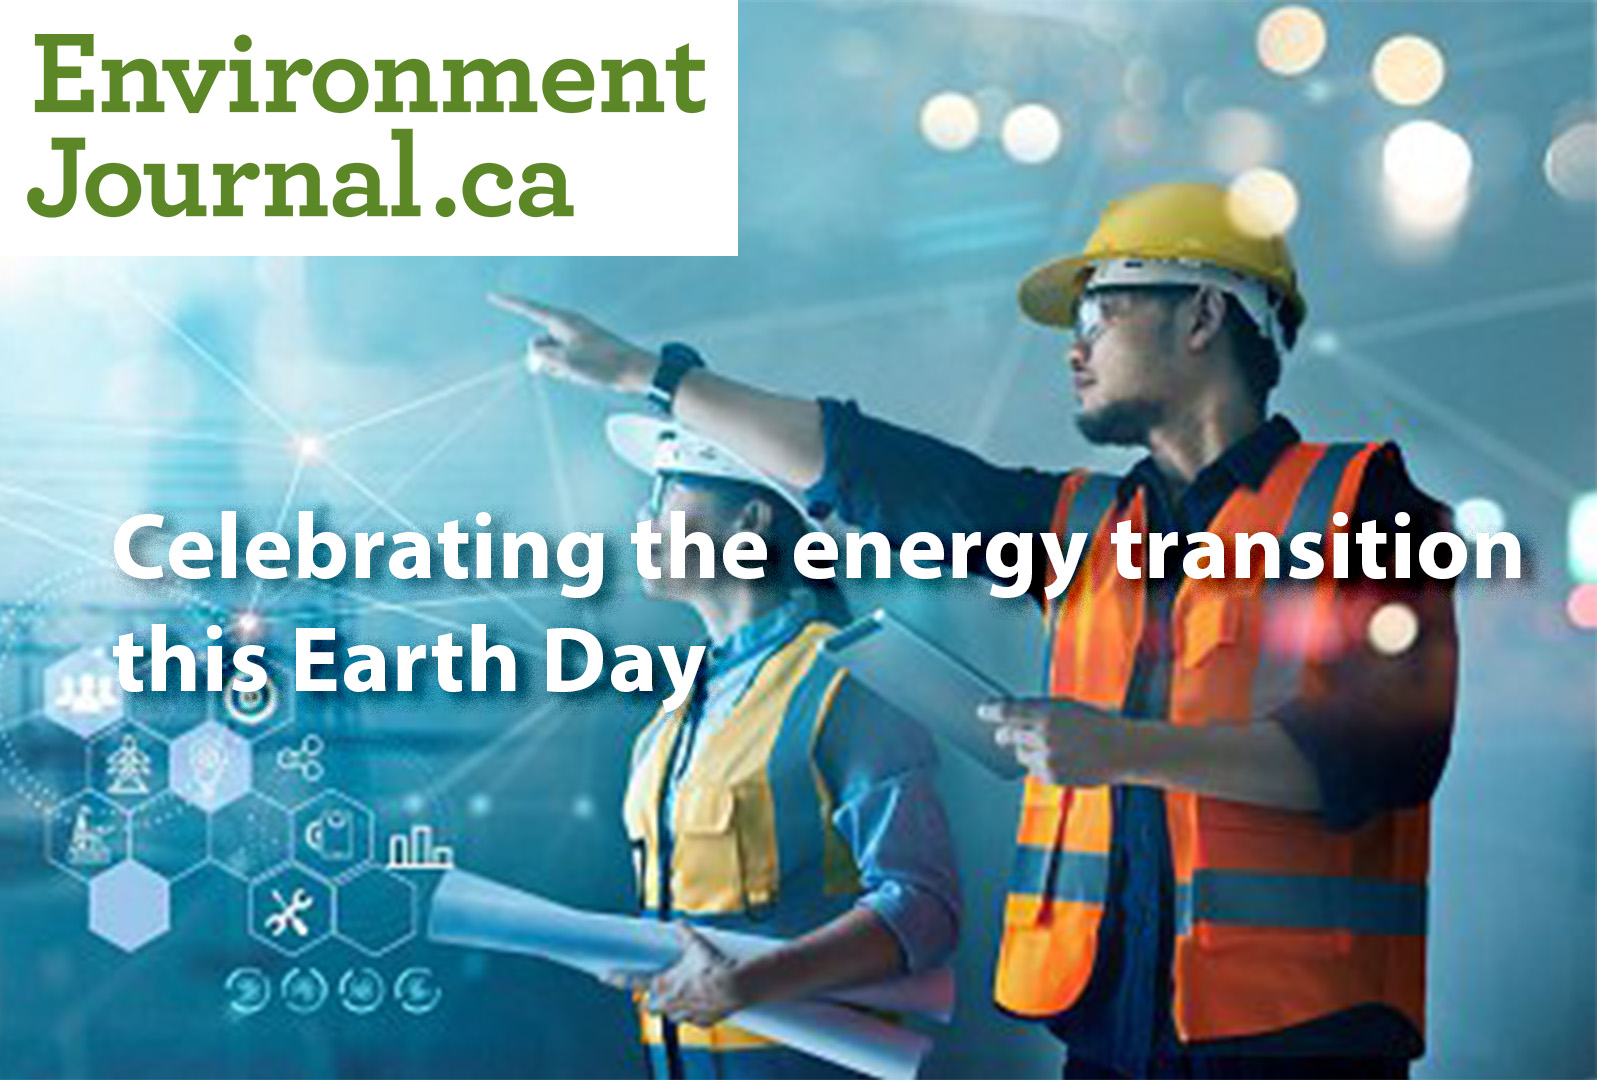 Celebrating the energy transition this Earth Day environmentjournal.ca